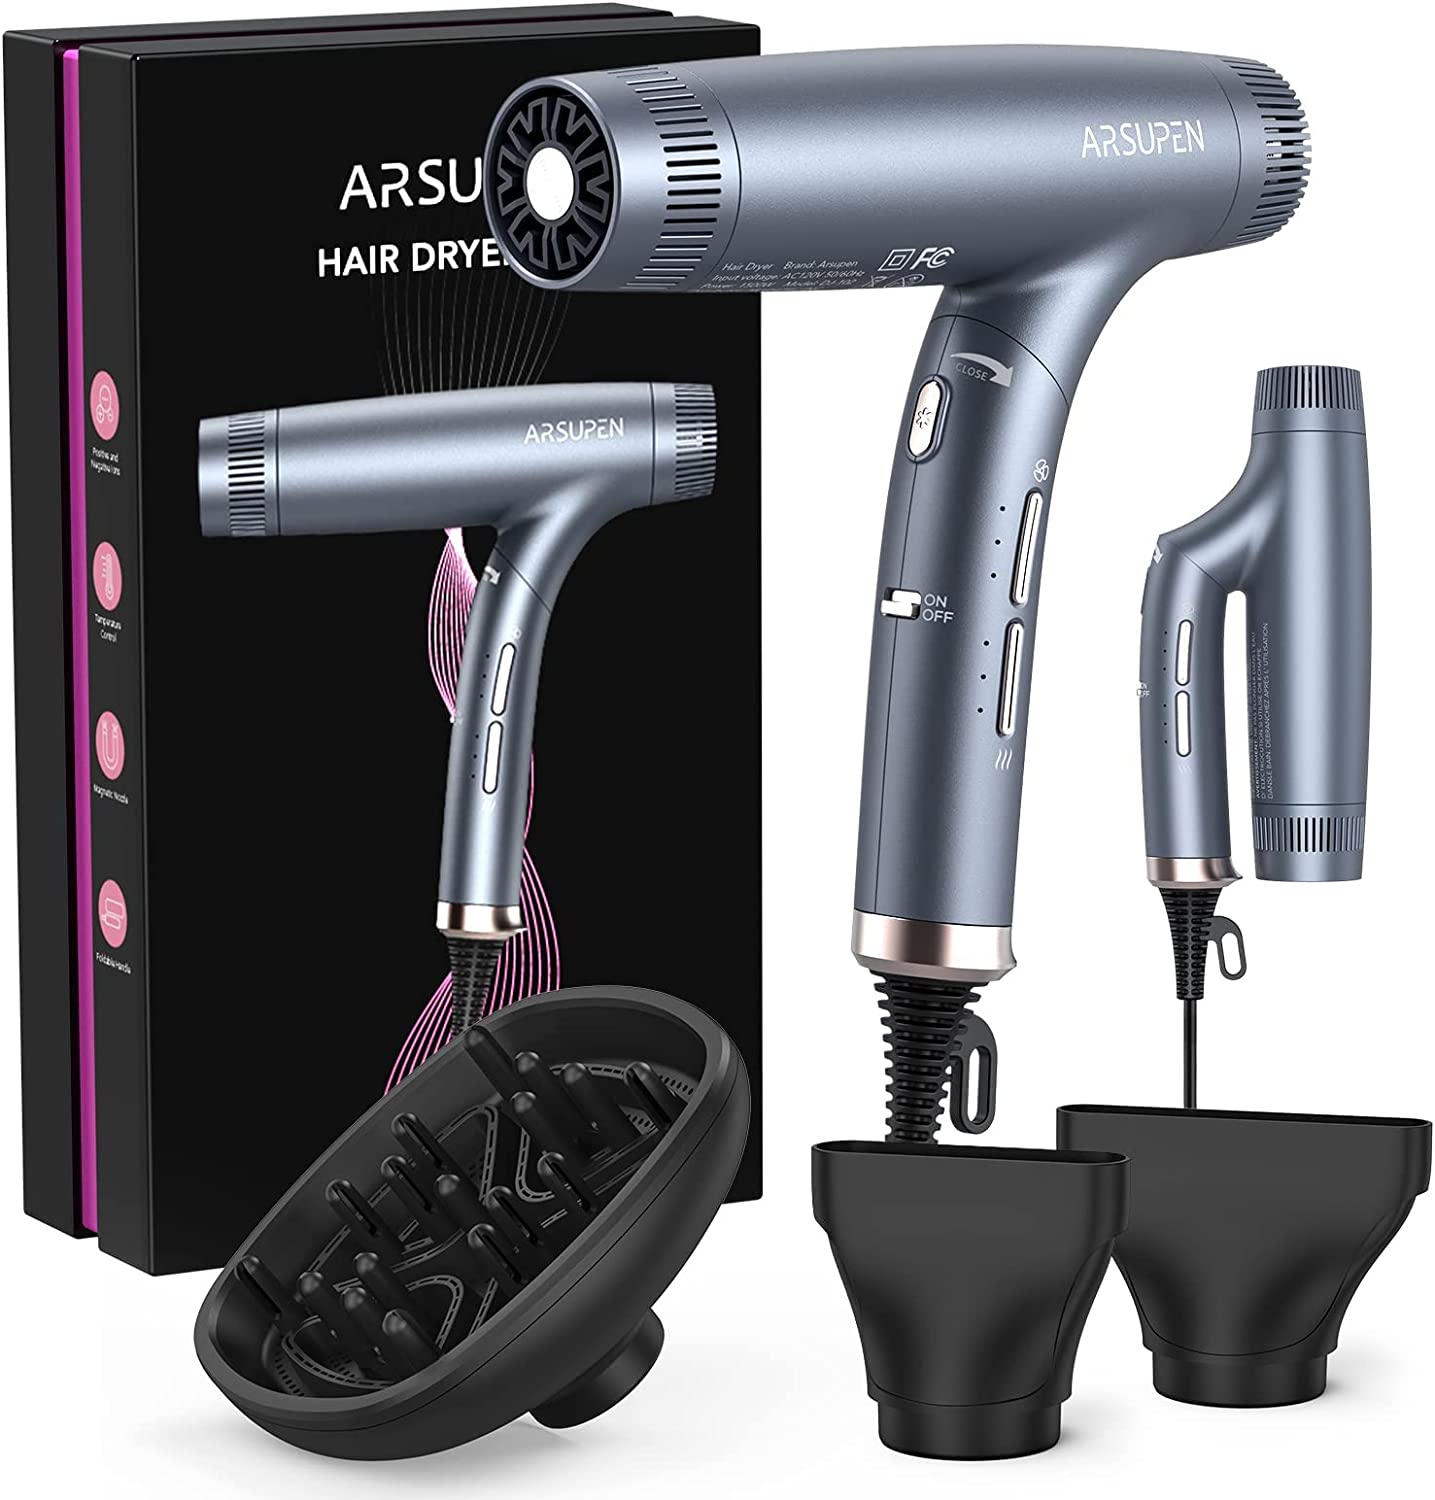 ARSUPEN Hair Dryer with Minoxidil Tips and Tricks-Arsupen Professional Hair Dryer with Powerful Brushless Motor